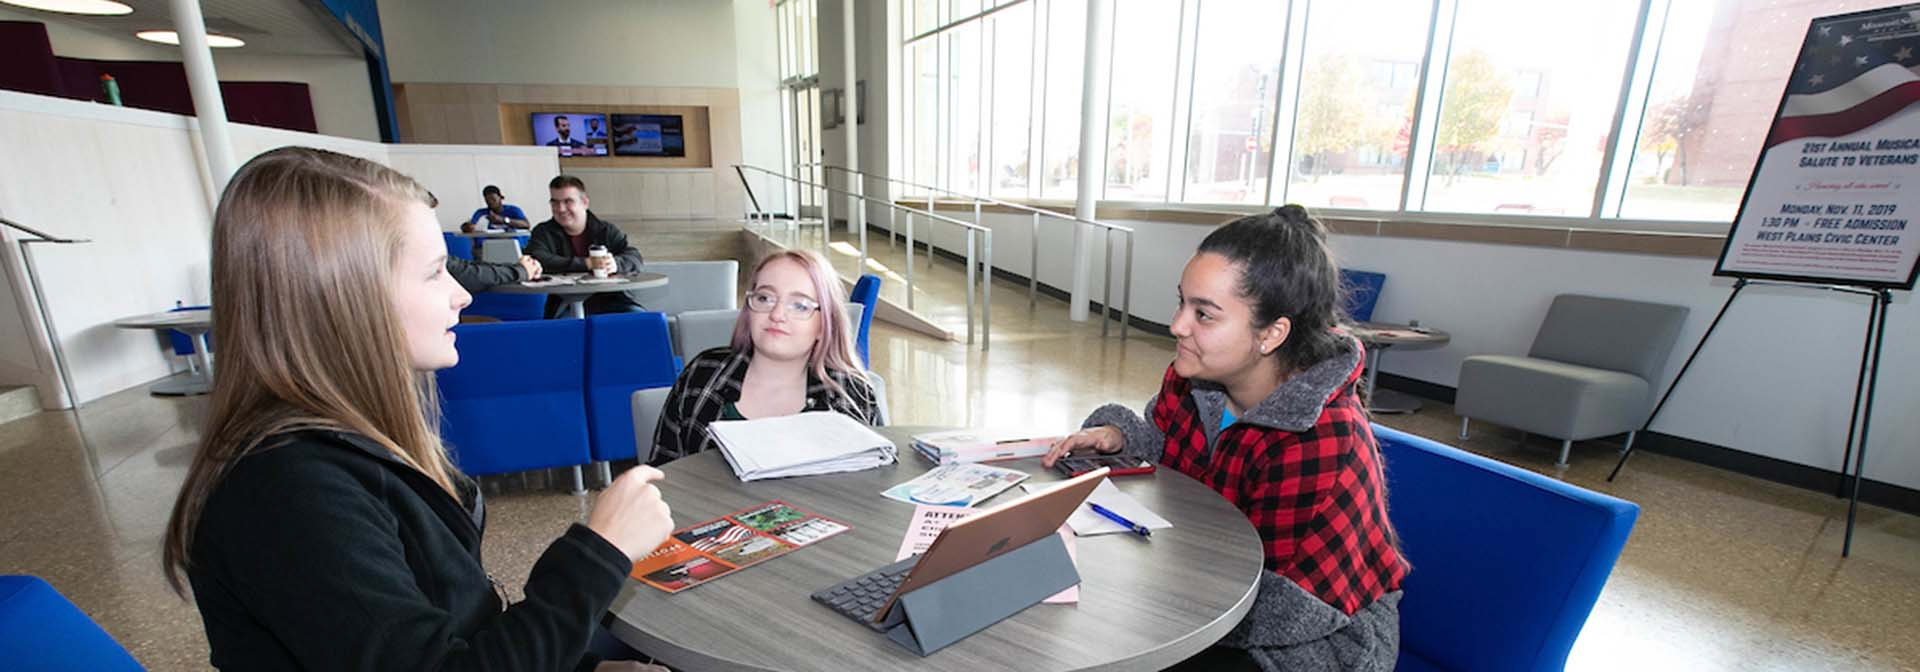 Three students discussing at a table